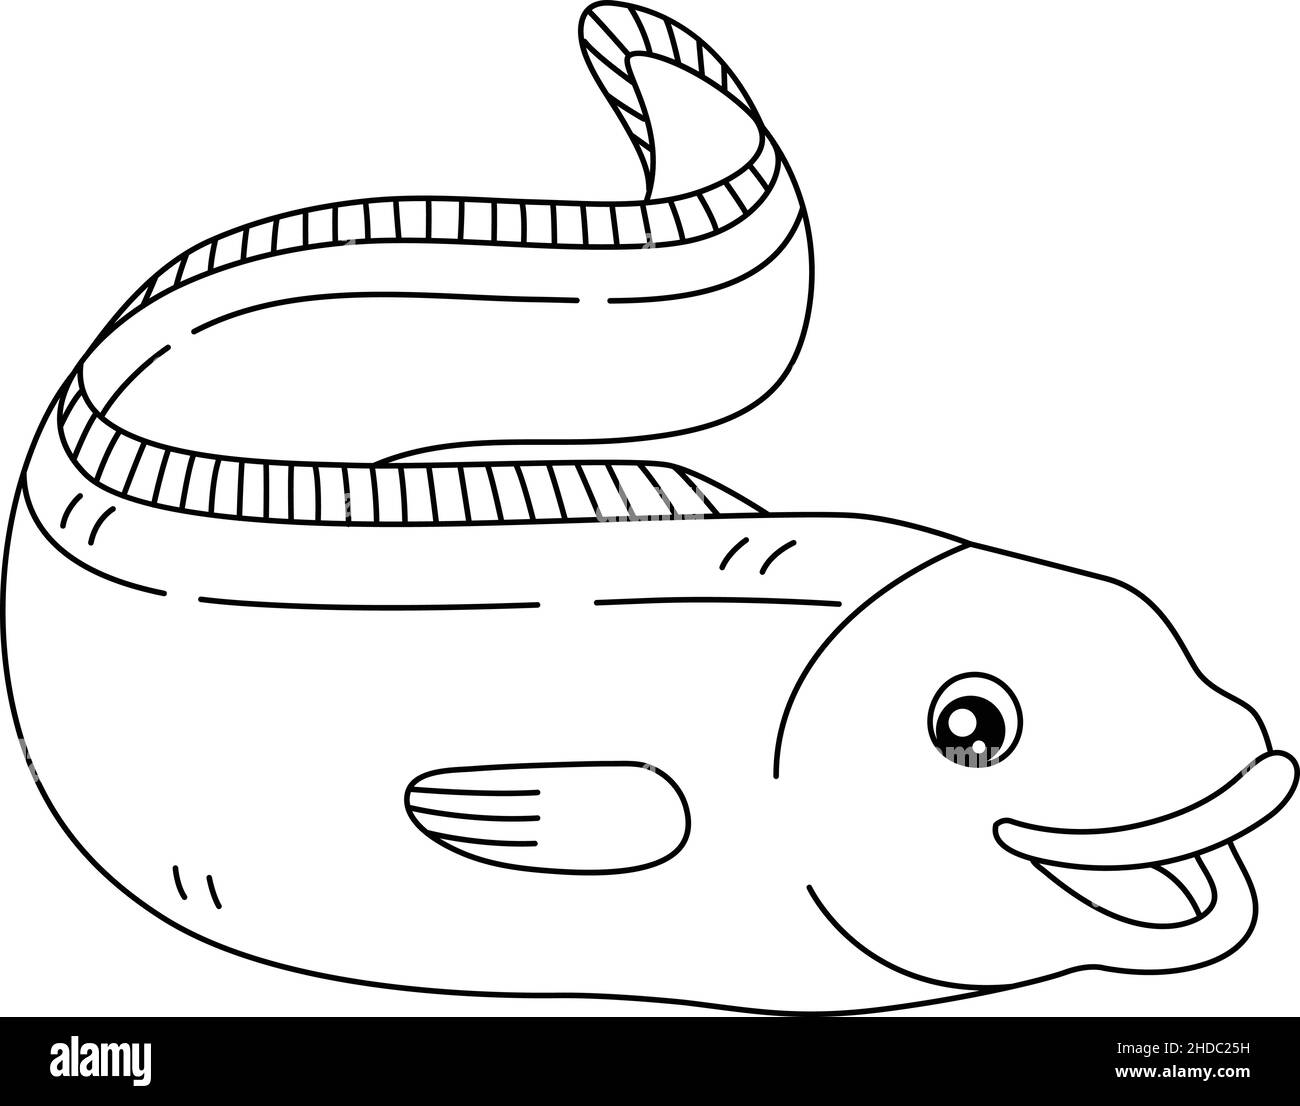 Eel Coloring Page Isolated for Kids Stock Vector